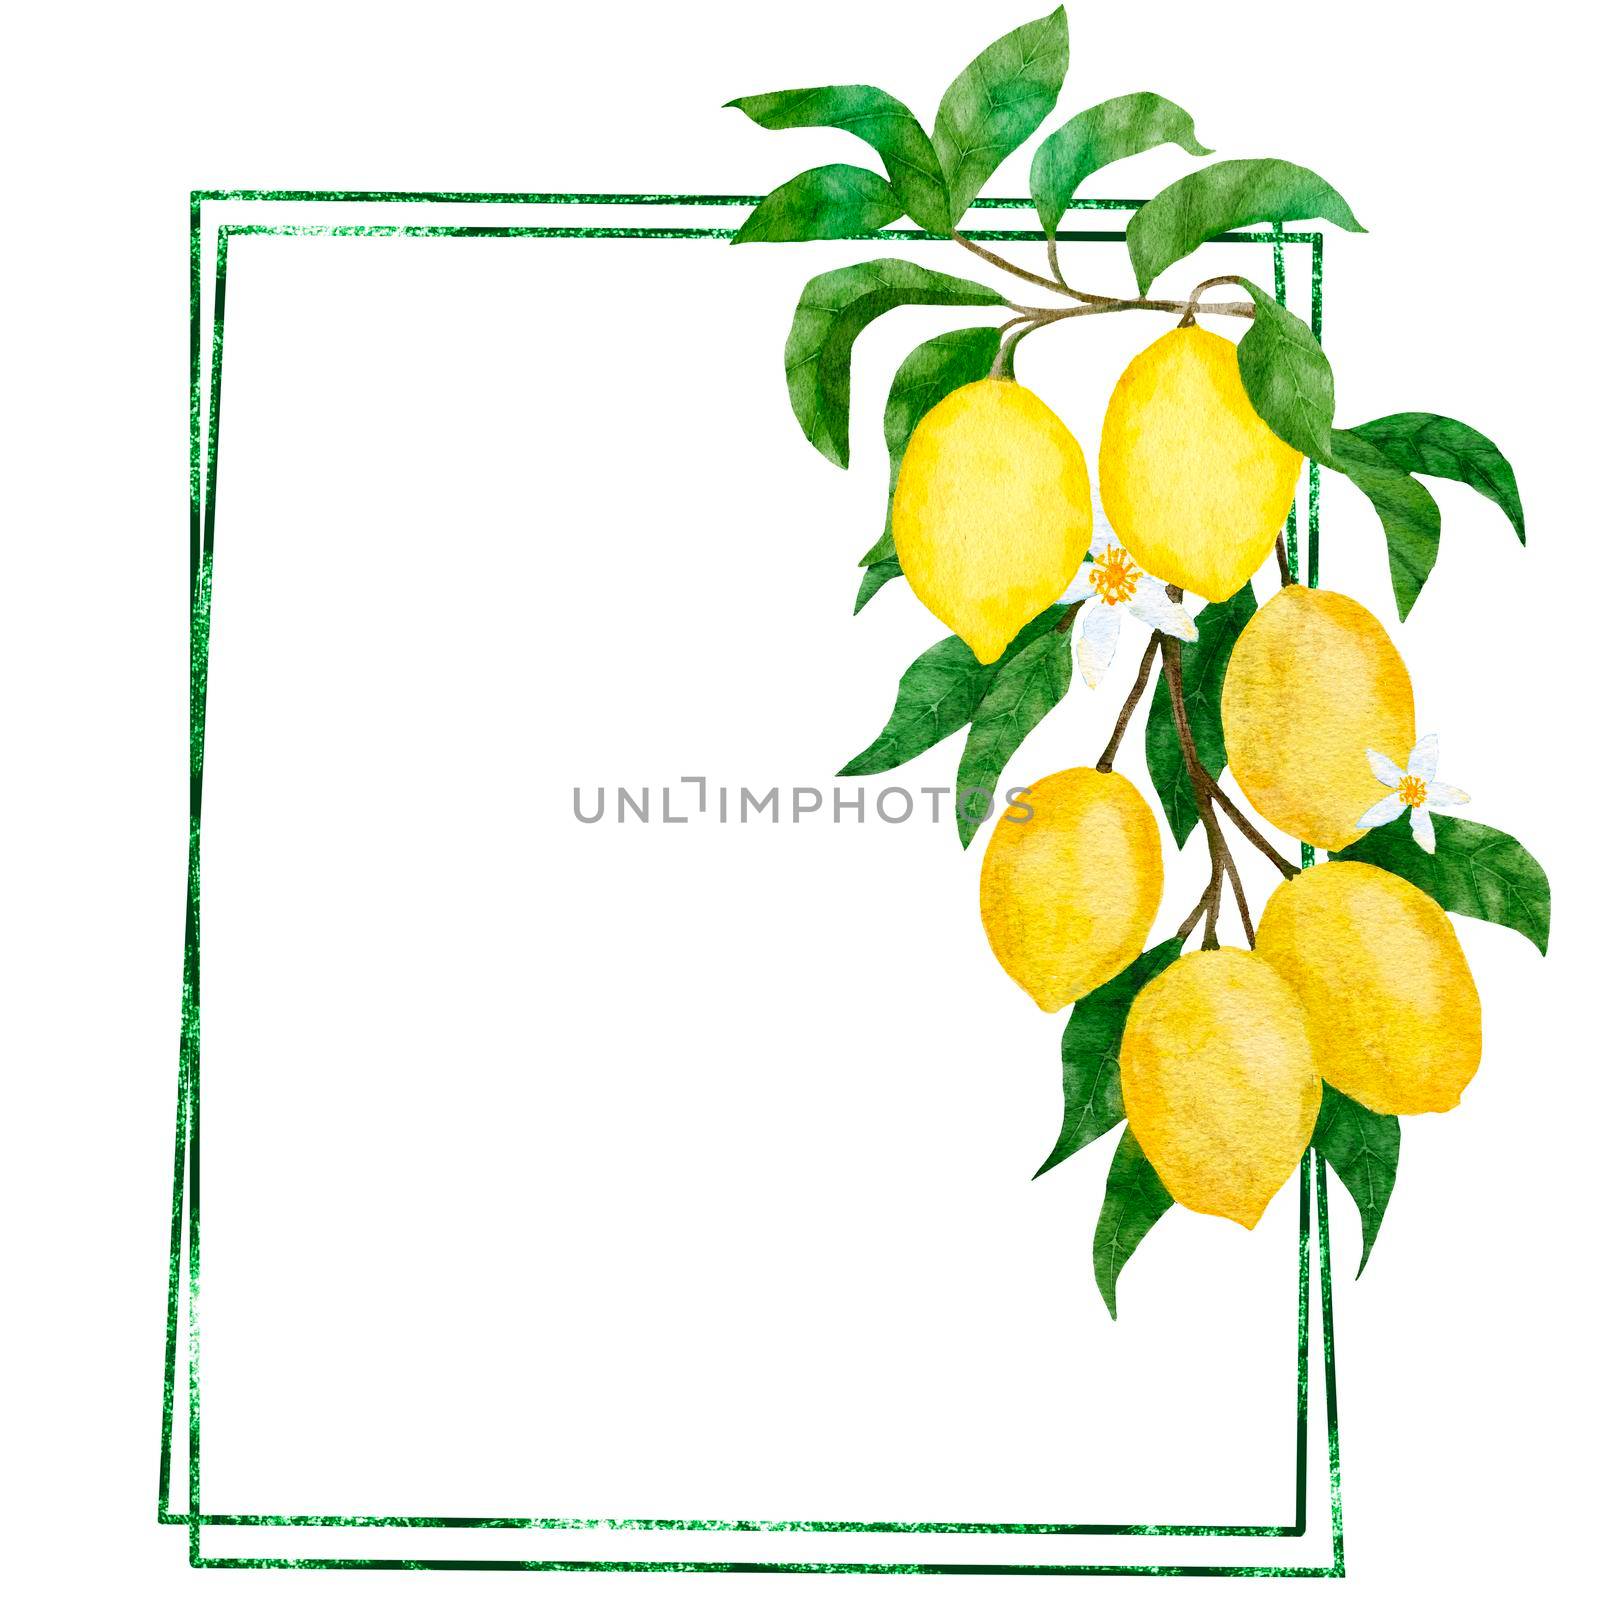 Watercolor hand drawn frame poster with yellow lemons and green leaves. Summer fruit citrus border with modern minimalist glitter lines for wedding cards invitations, nature design illustration. by Lagmar